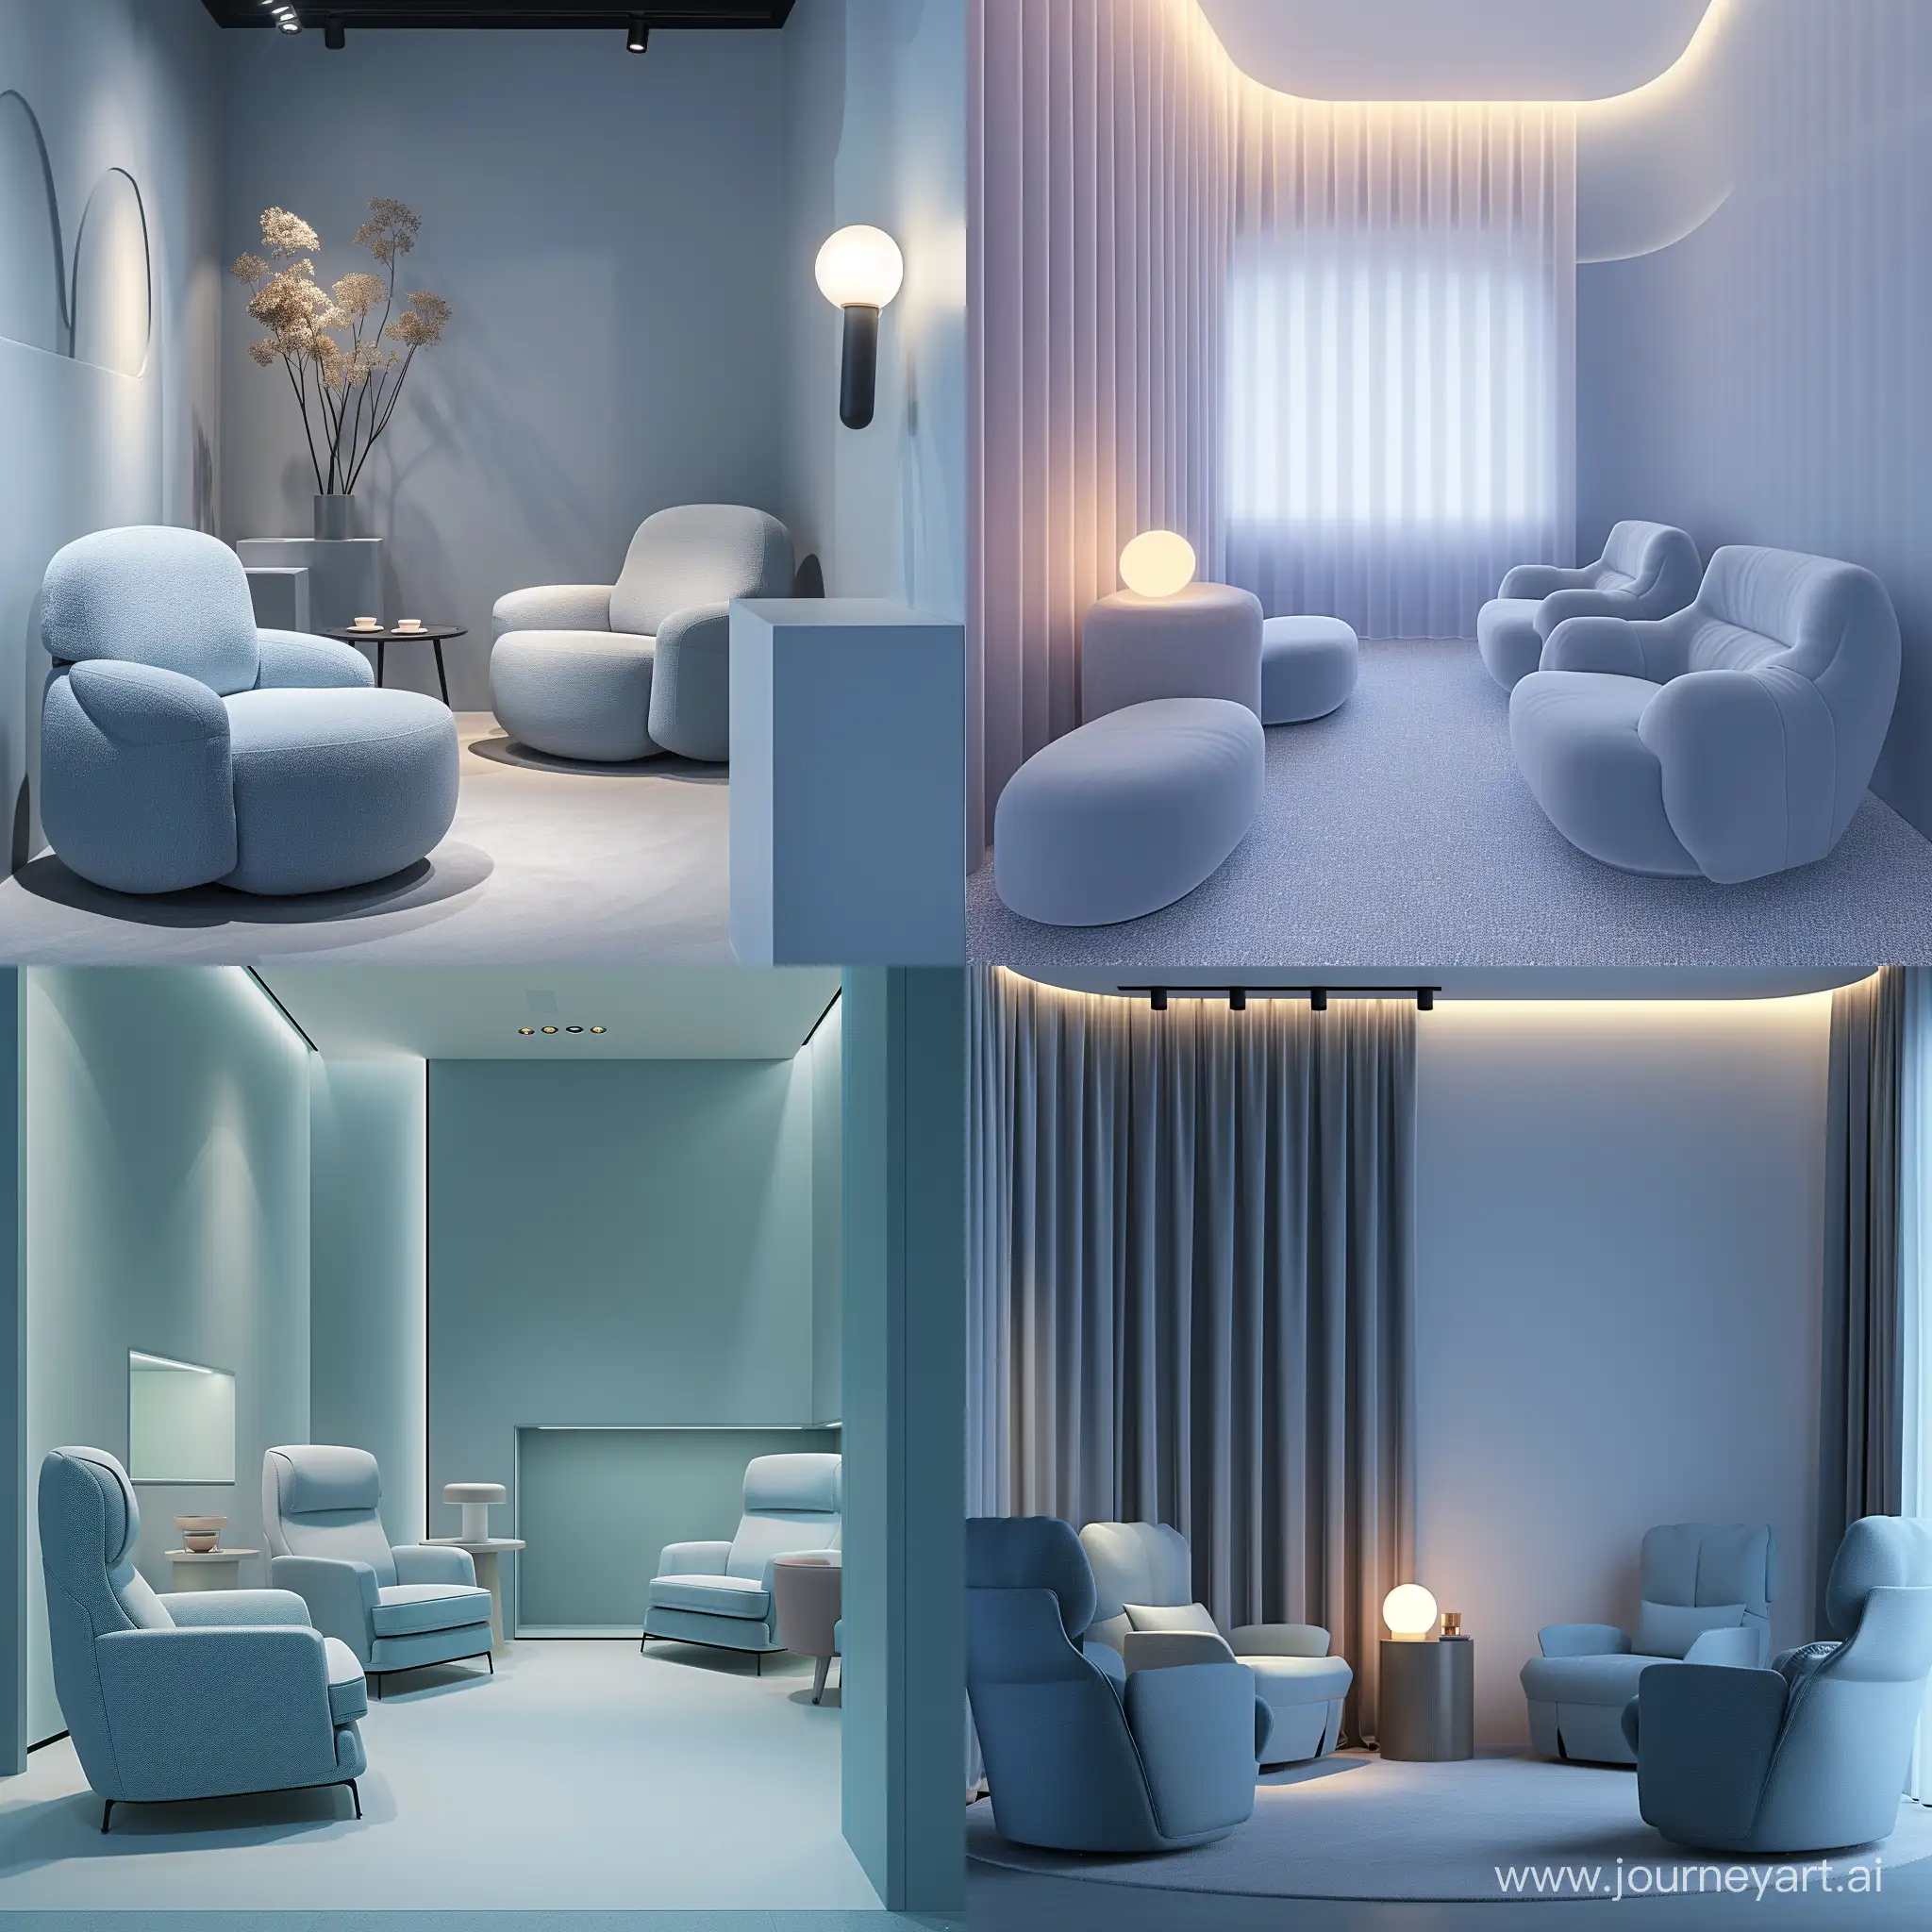 Tranquil-Private-Viewing-Room-for-Kids-Chairs-in-Soft-Blues-and-Greys